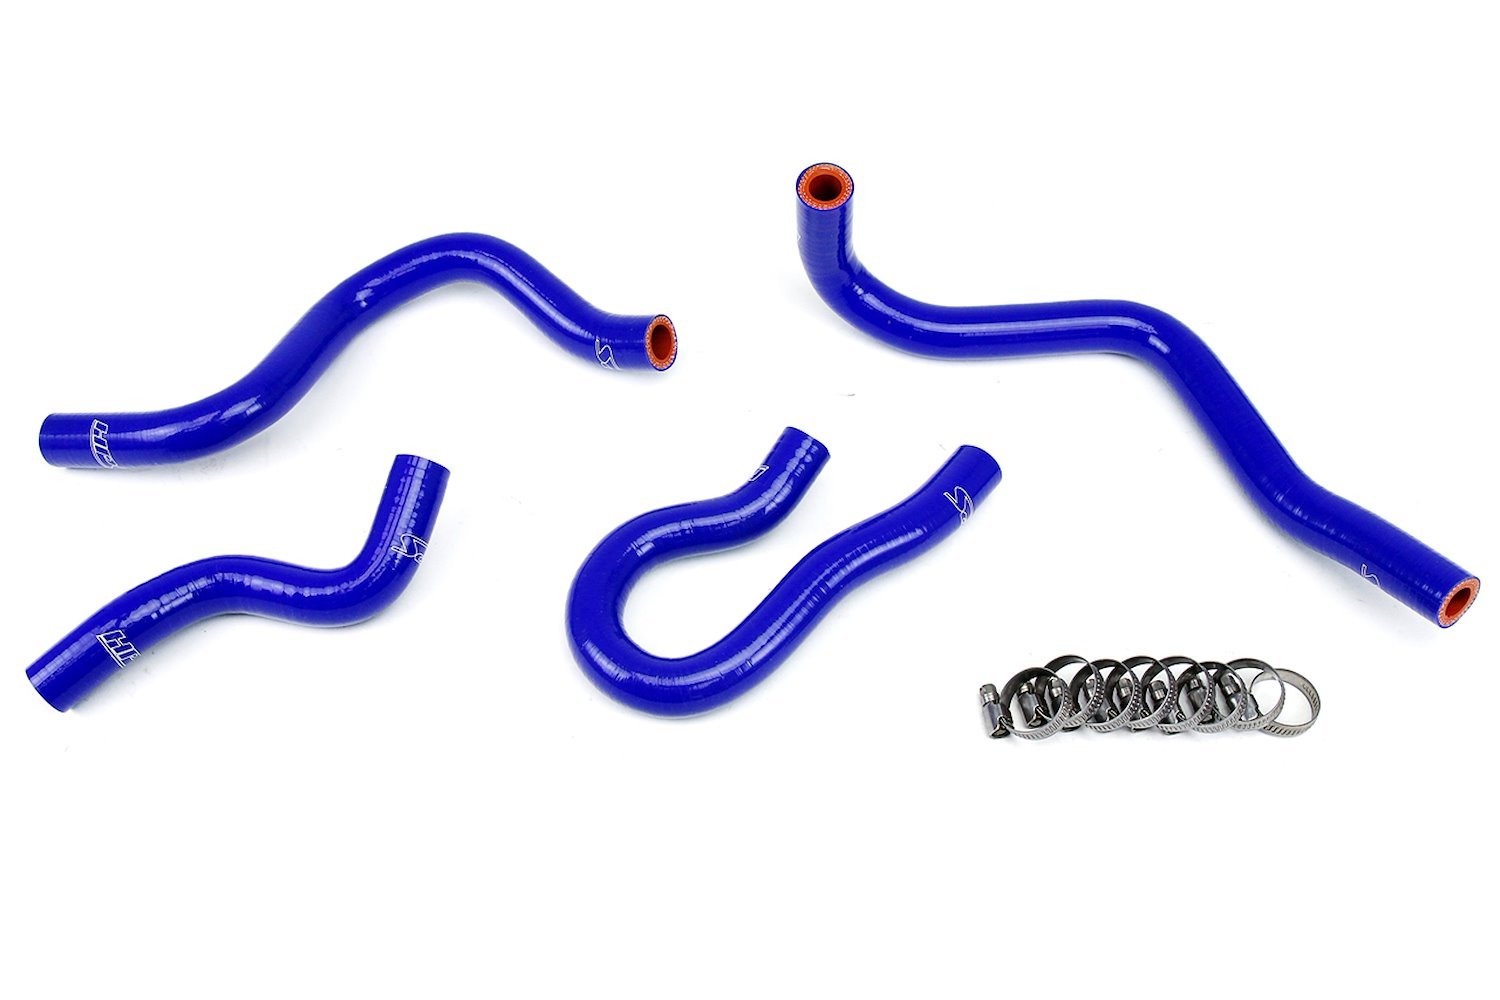 57-1769-BLUE Heater Hose Kit, High-Temp 3-Ply Reinforced Silicone, Replace OEM Rubber Heater Coolant Hoses